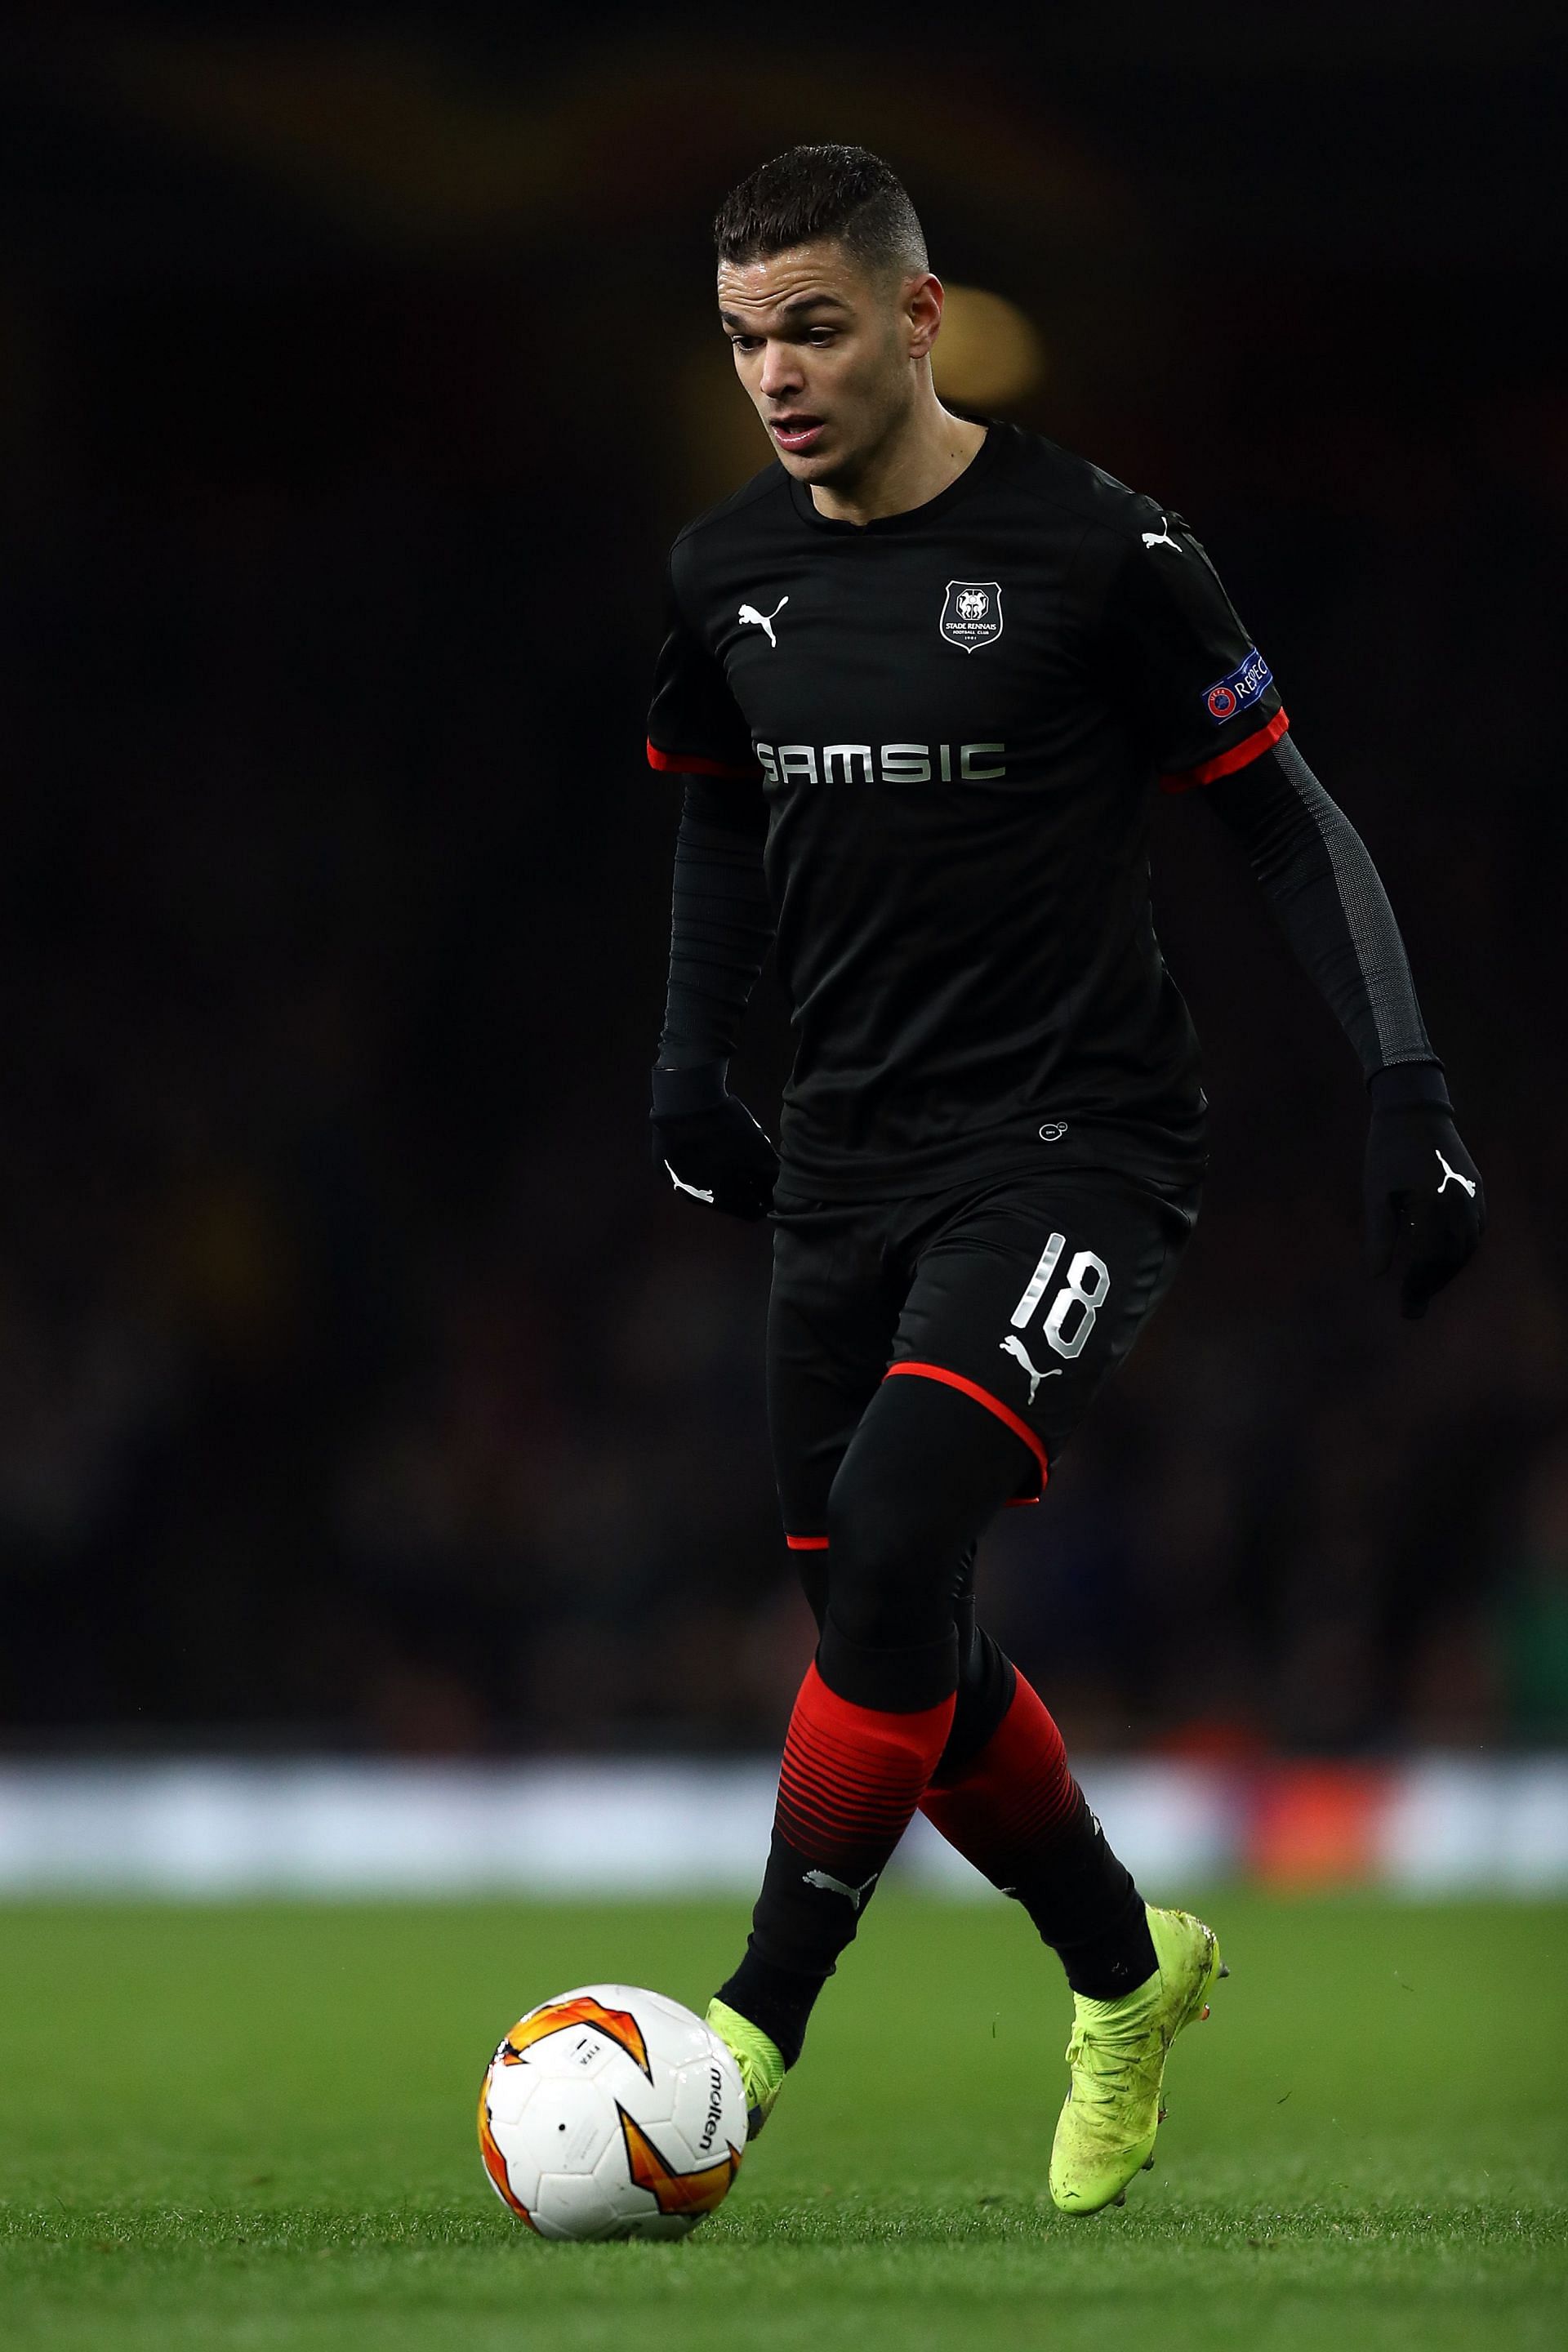 Hatem Ben Arfa of Stade Rennais FC in action during the UEFA Europa League Round of 16 Second Leg match between Arsenal and Stade Rennais at Emirates Stadium on March 14, 2019.